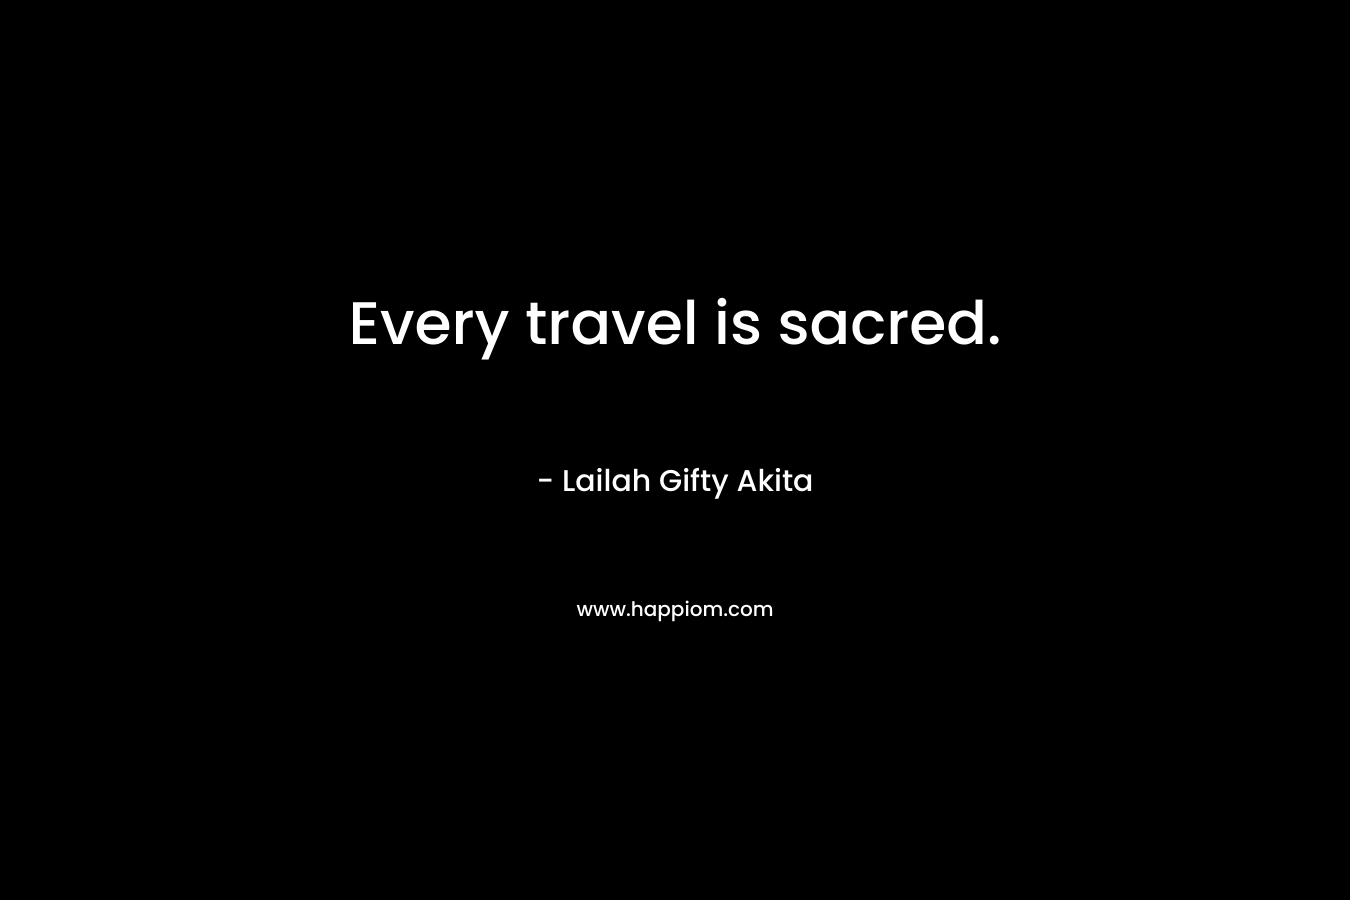 Every travel is sacred.